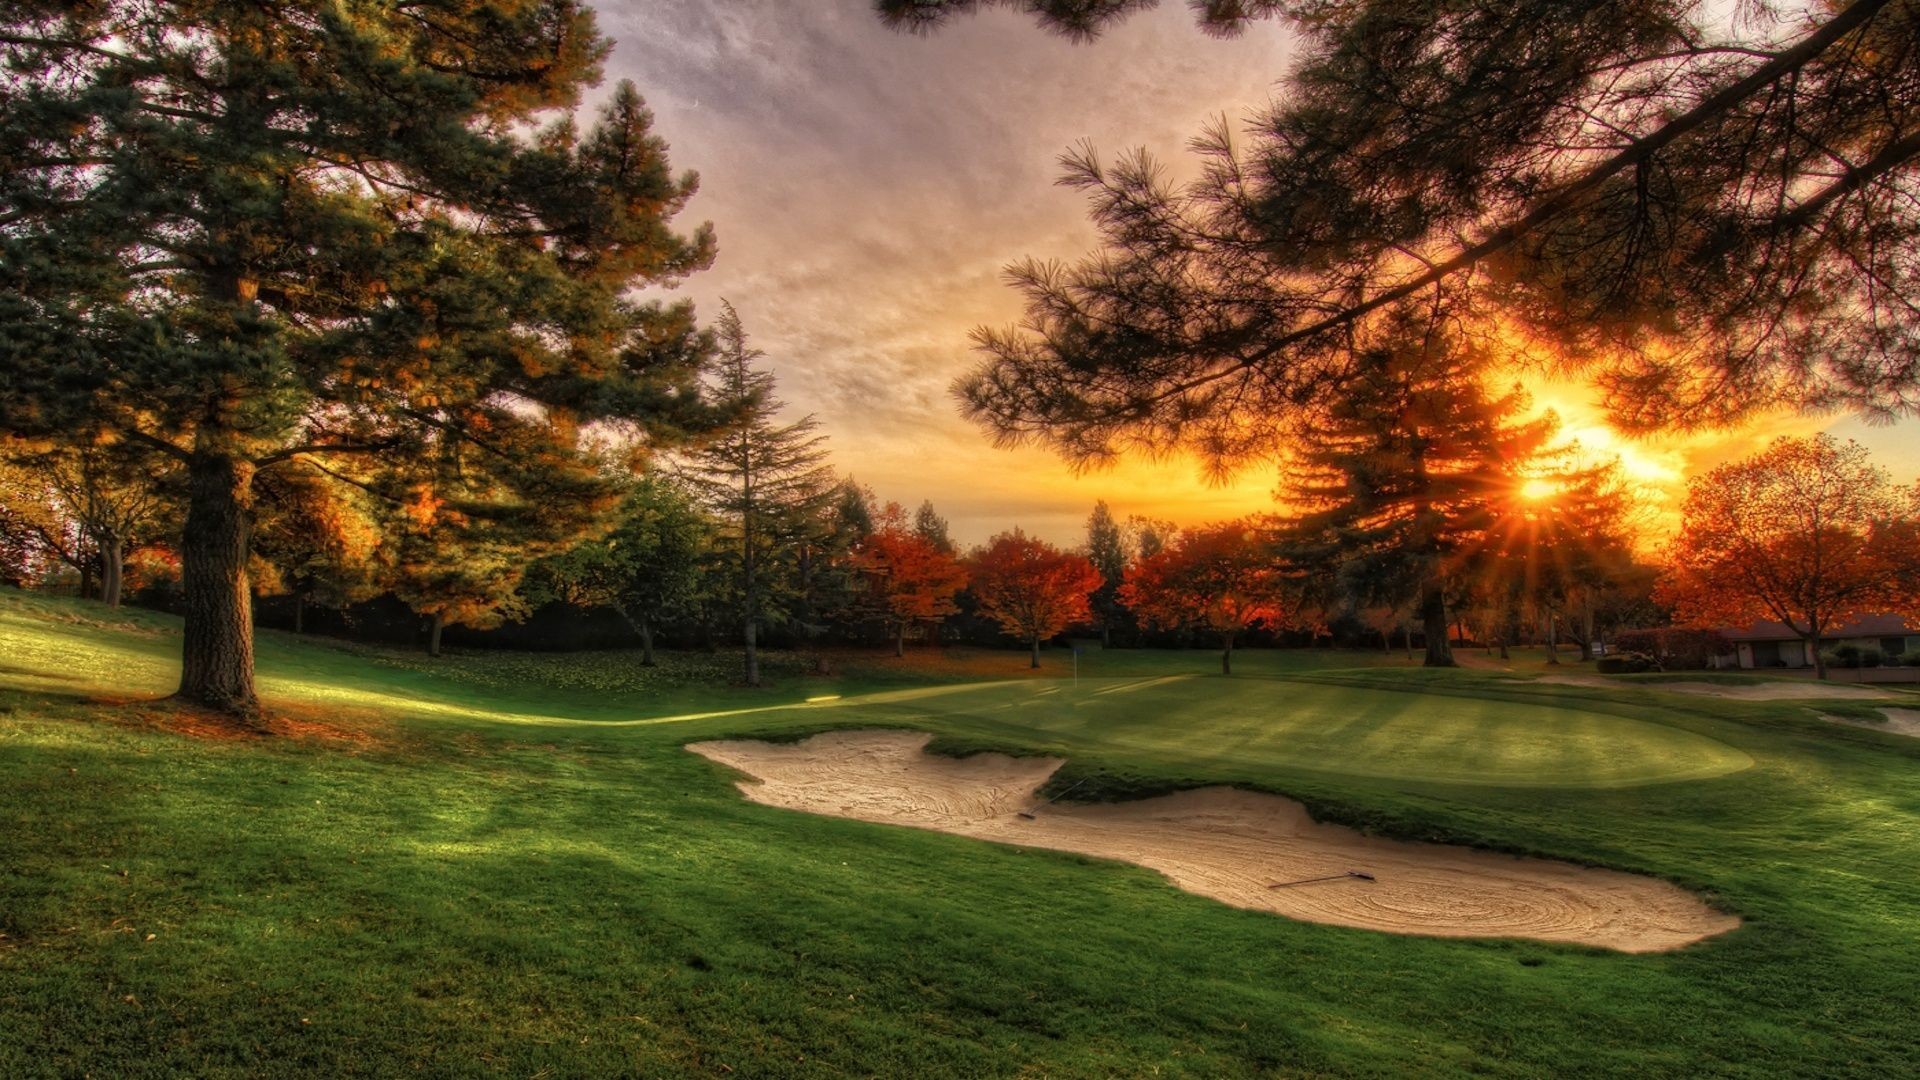 1920x1080 Golf Course Wallpapers - Wallpaper Cave